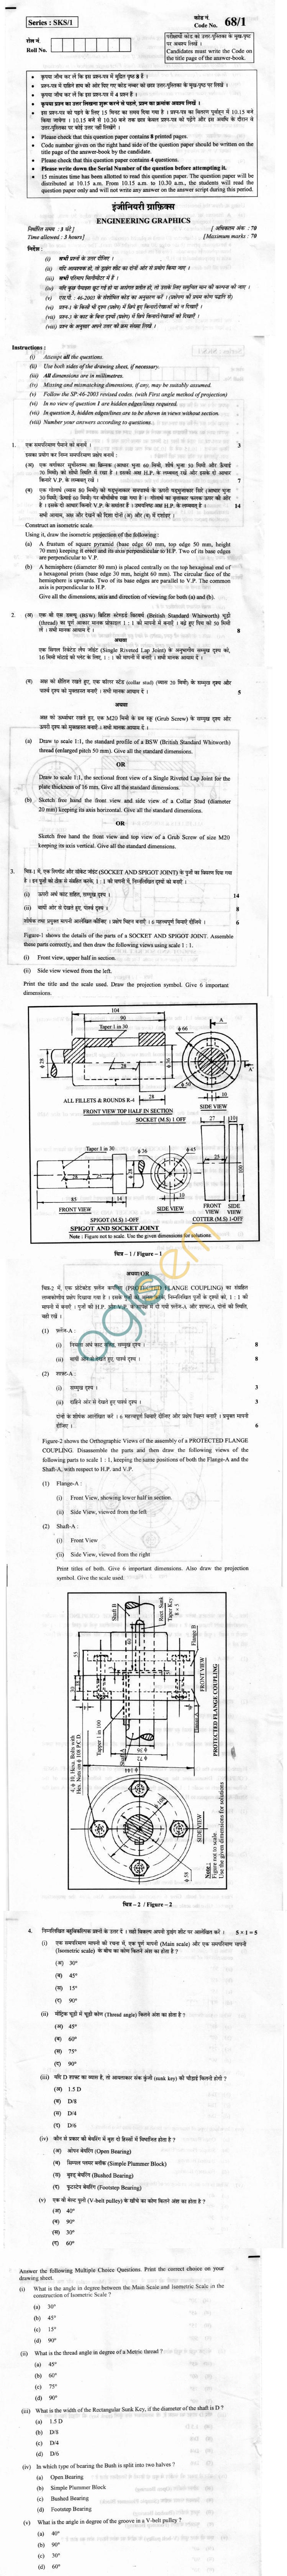 CBSE Board Exam 2013 Class XII Question Paper - Engineering Graphics